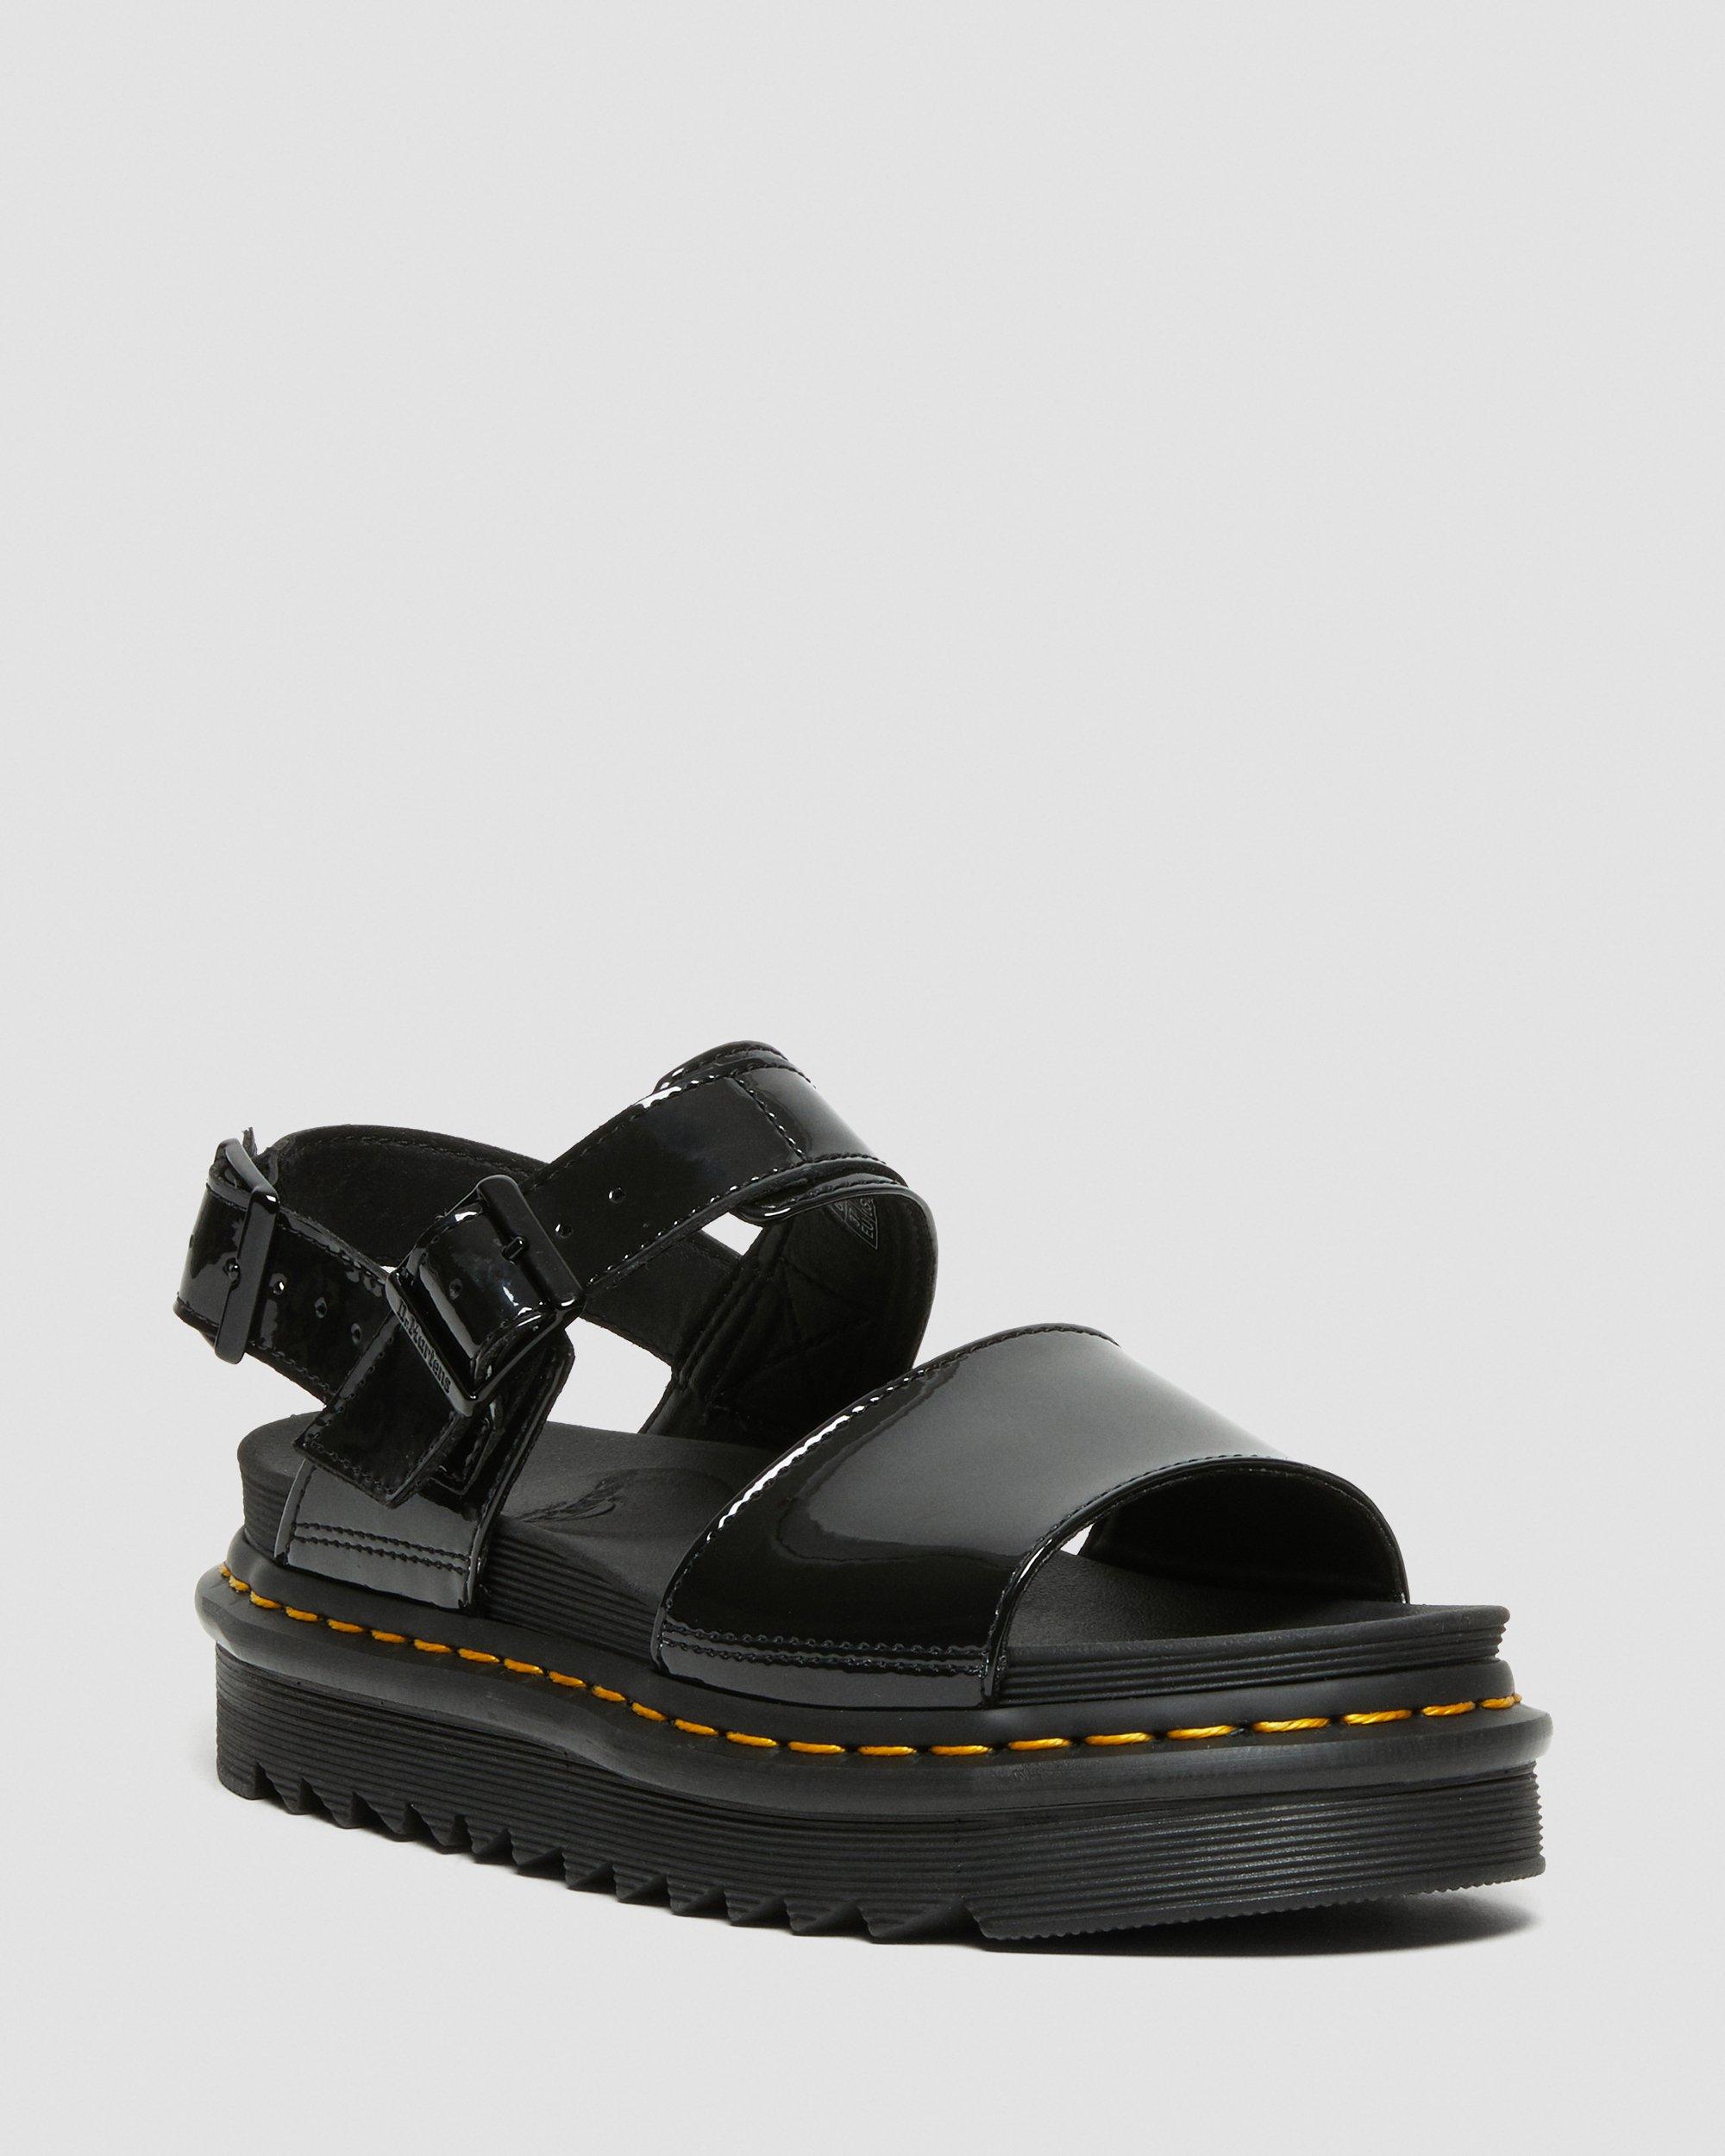 Voss Women's Patent Leather Strap Sandals in Black | Dr. Martens